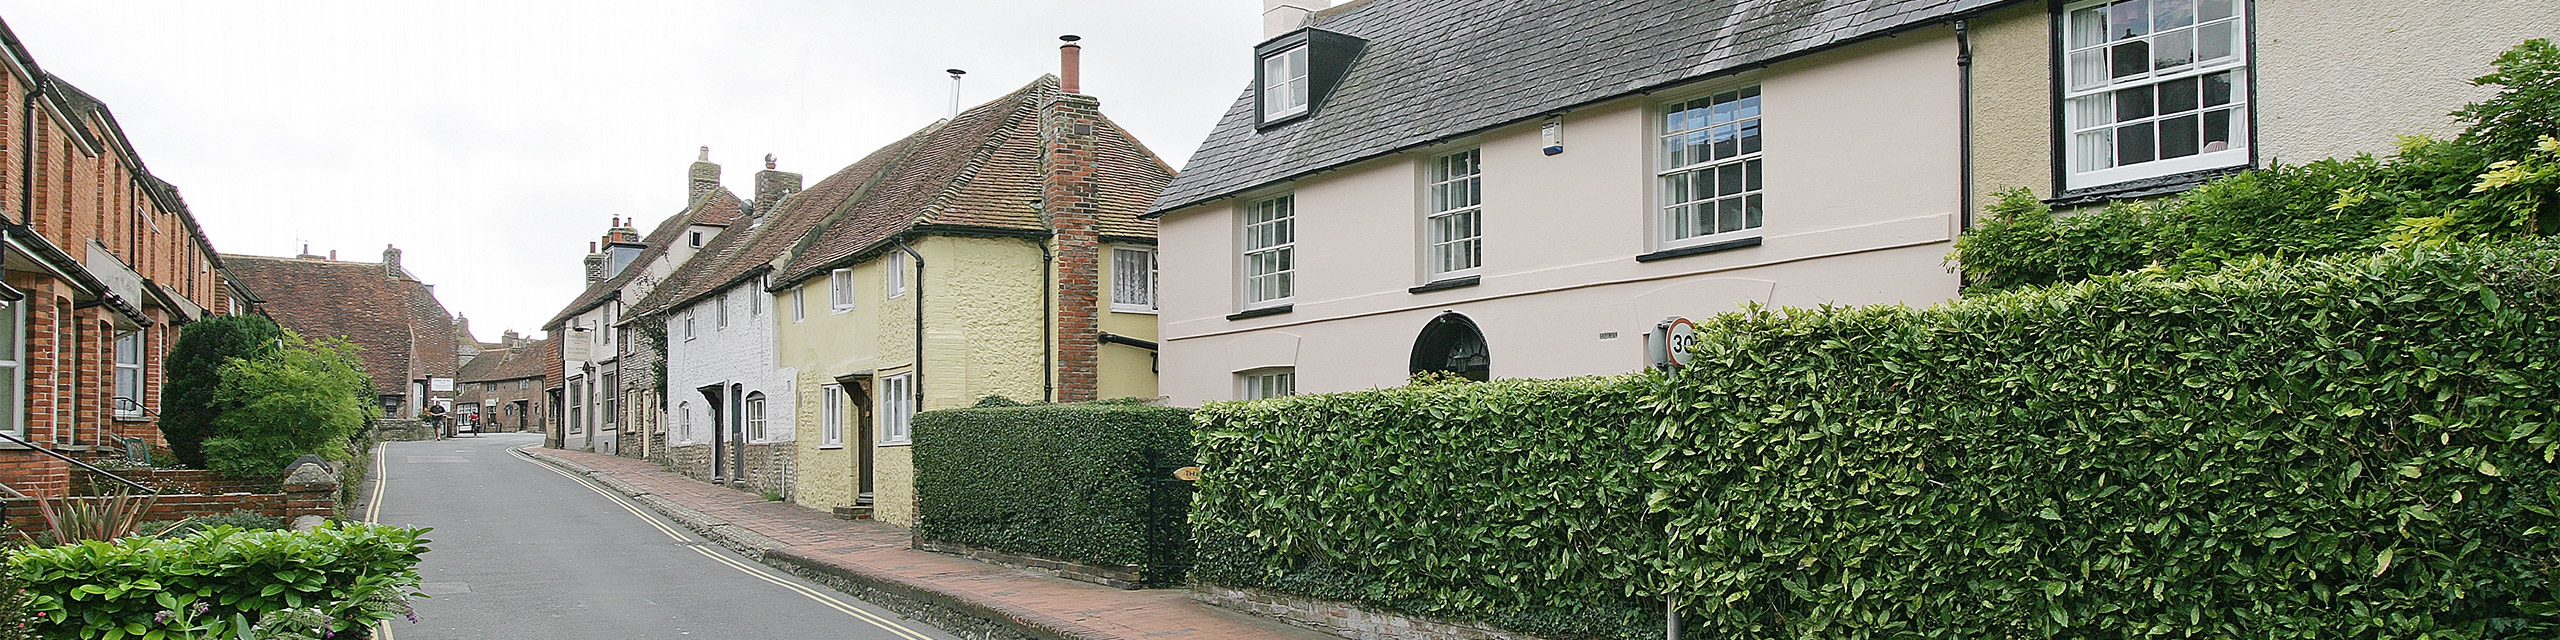 View of North Street, Alfriston, including The Dene